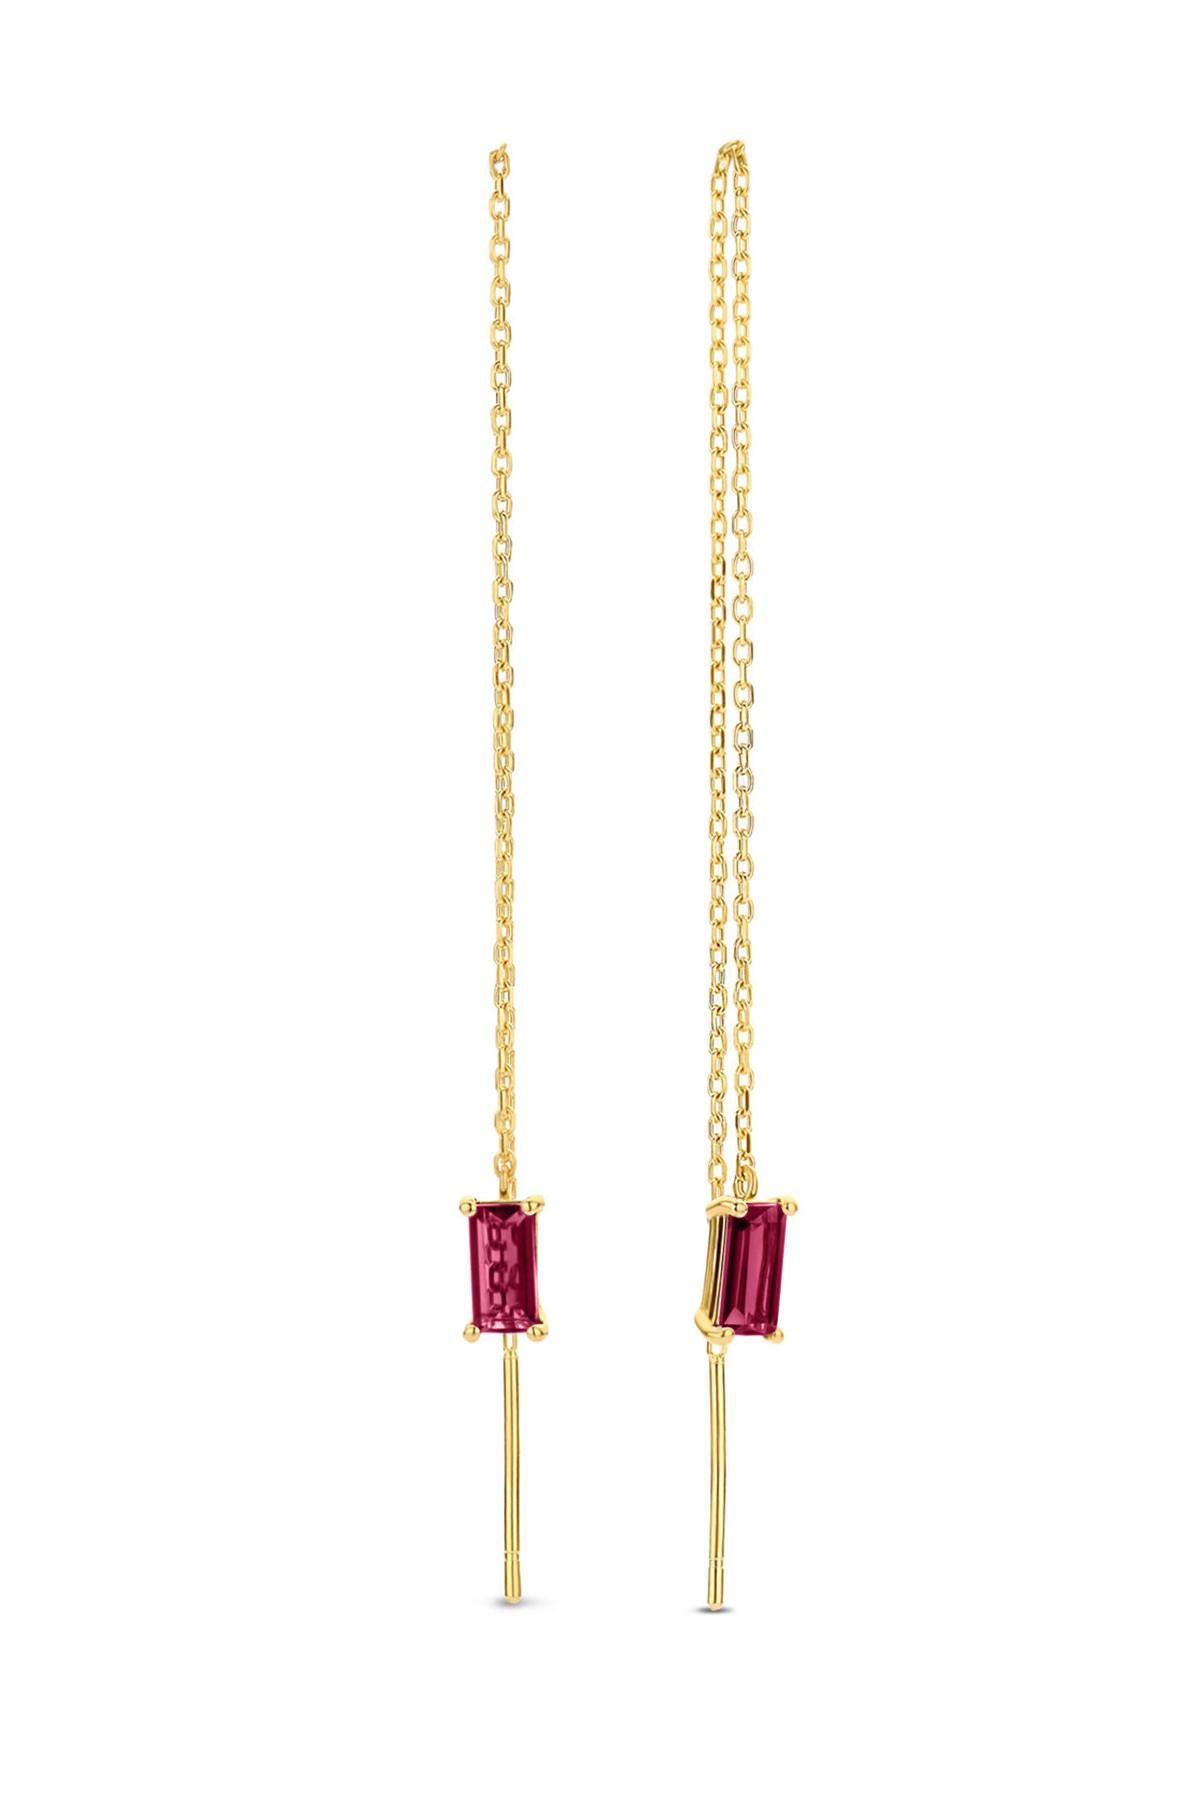 Modern 14k Solid Gold Drop Earrings with rubies.  For Sale